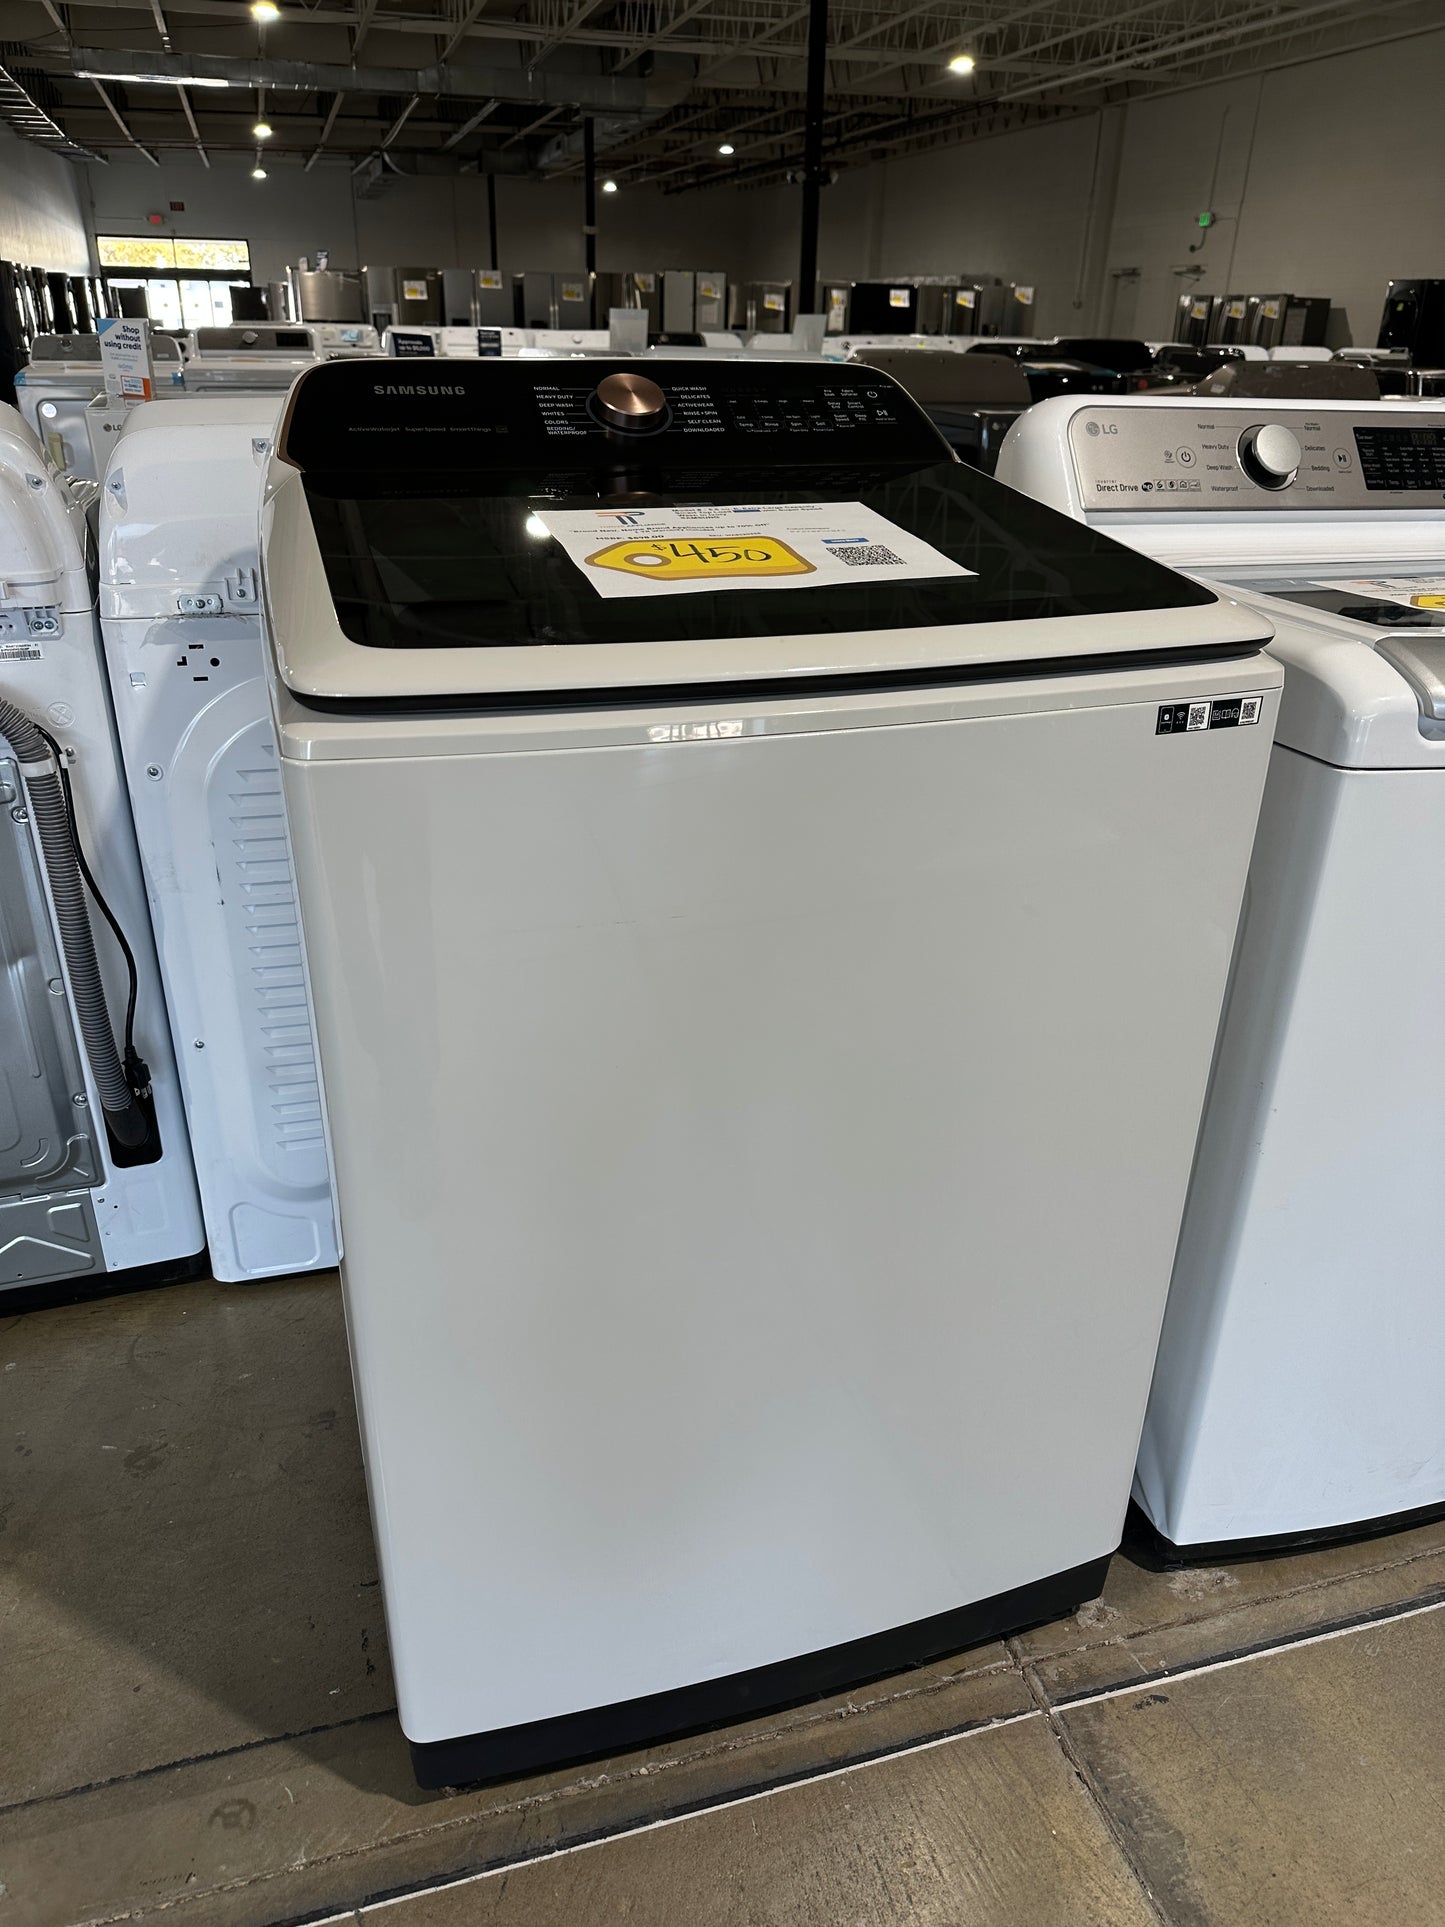 GORGEOUS NEW TOP LOAD SMART WASHER with SUPER SPEED WASH MODEL: WA55A7300AE/US  WAS12033S